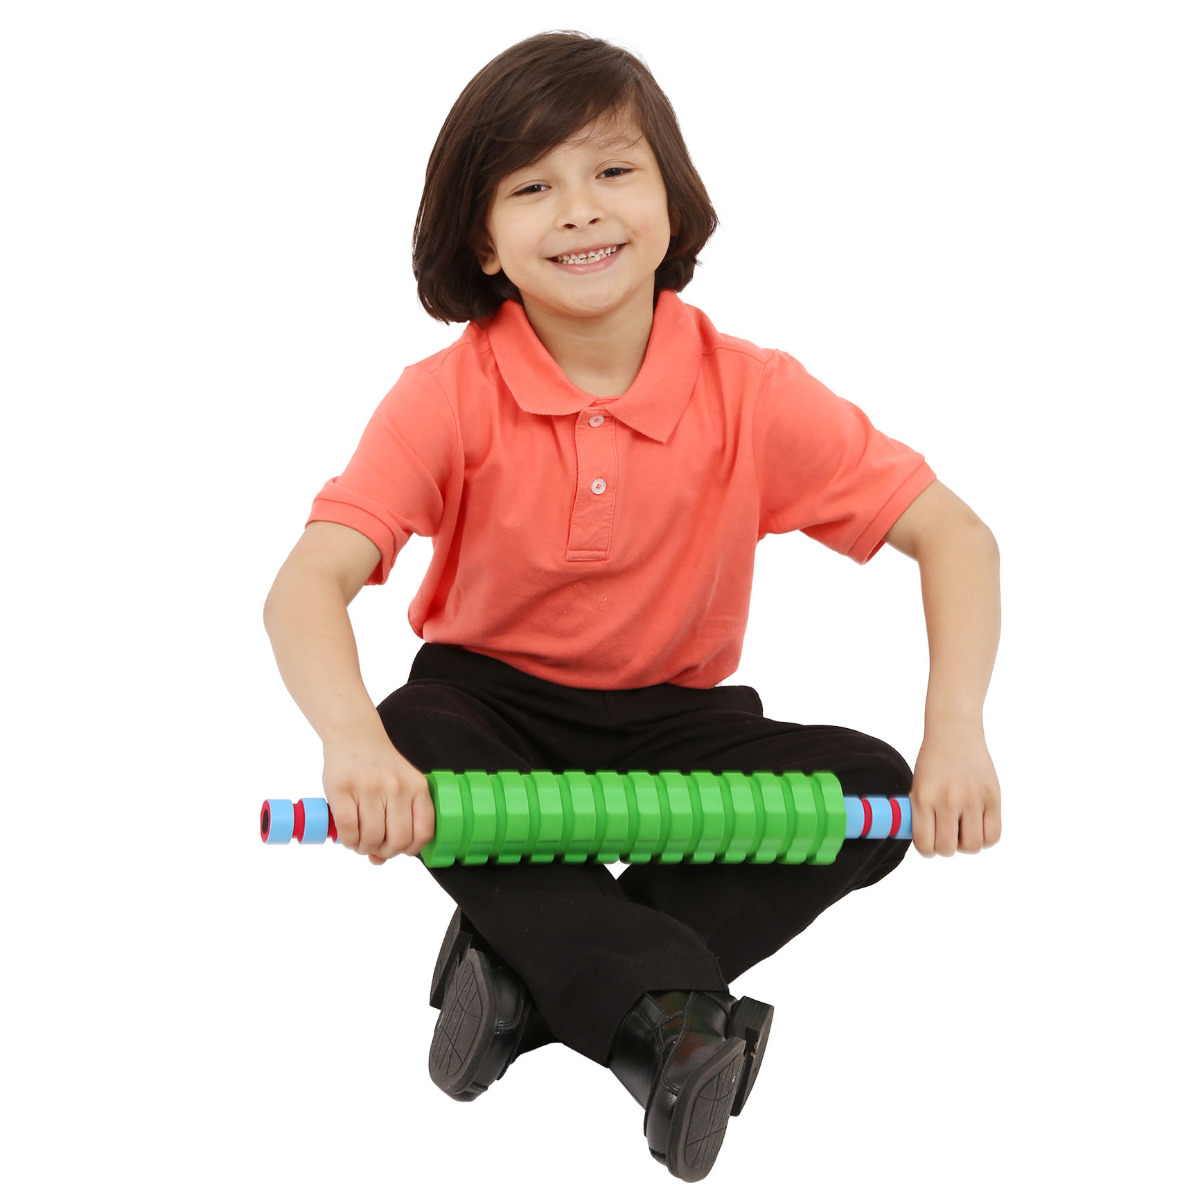 June_24_-_The_Value_of_Practicing_Occupational_Therapy_Skills_at_Home_roller